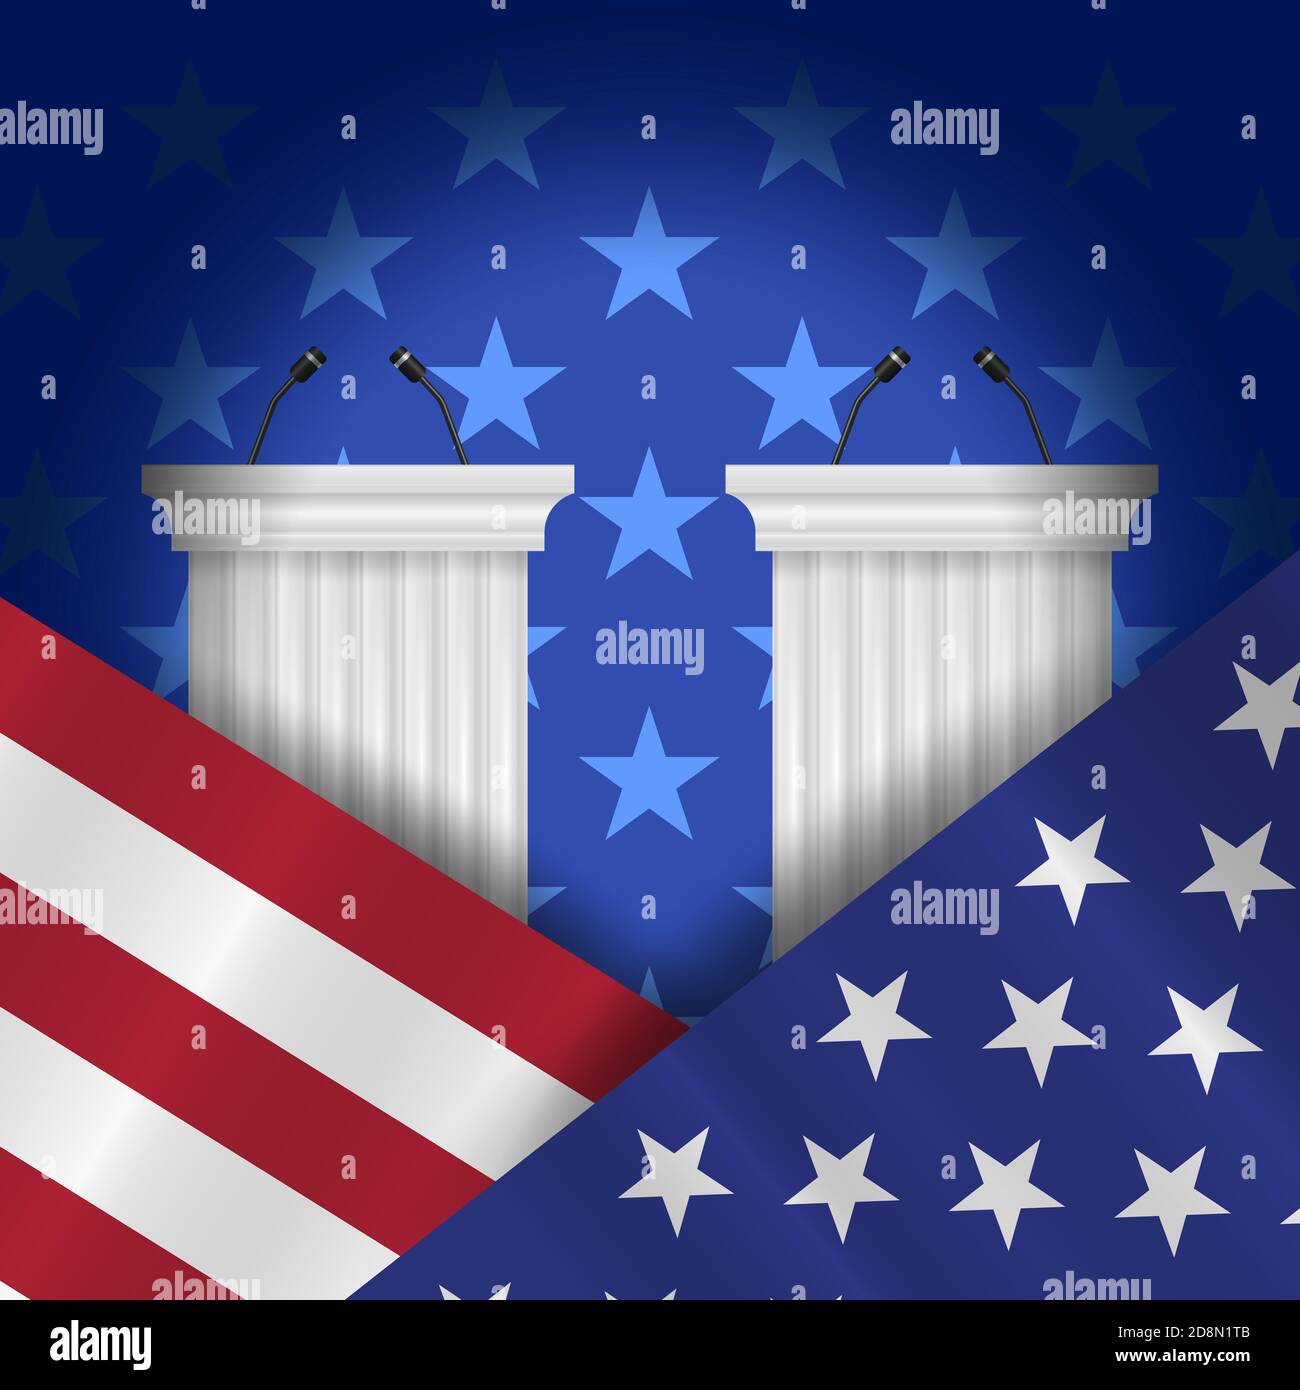 Pre-election debates. Opponents stands. 2020 United States presidential election. illustration. Stock Photo